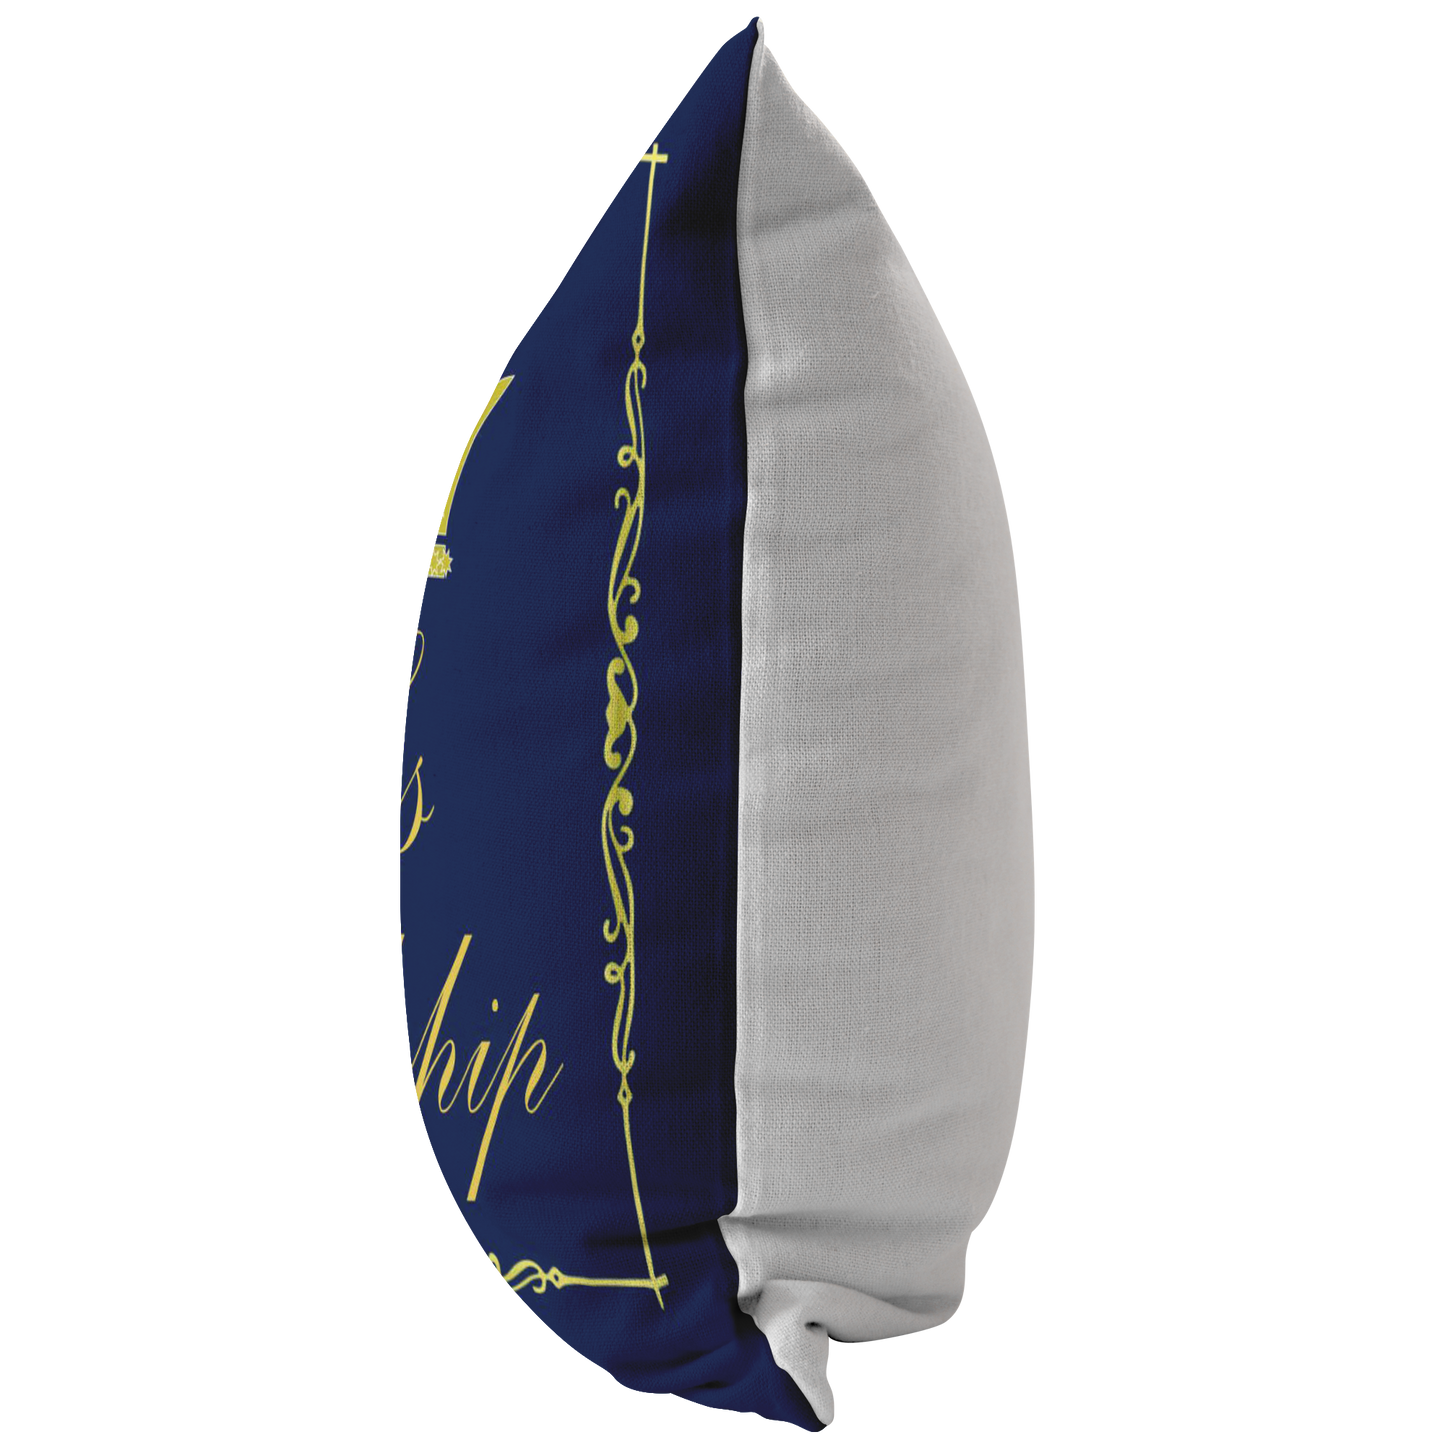 His Lordship Pillow, Navy